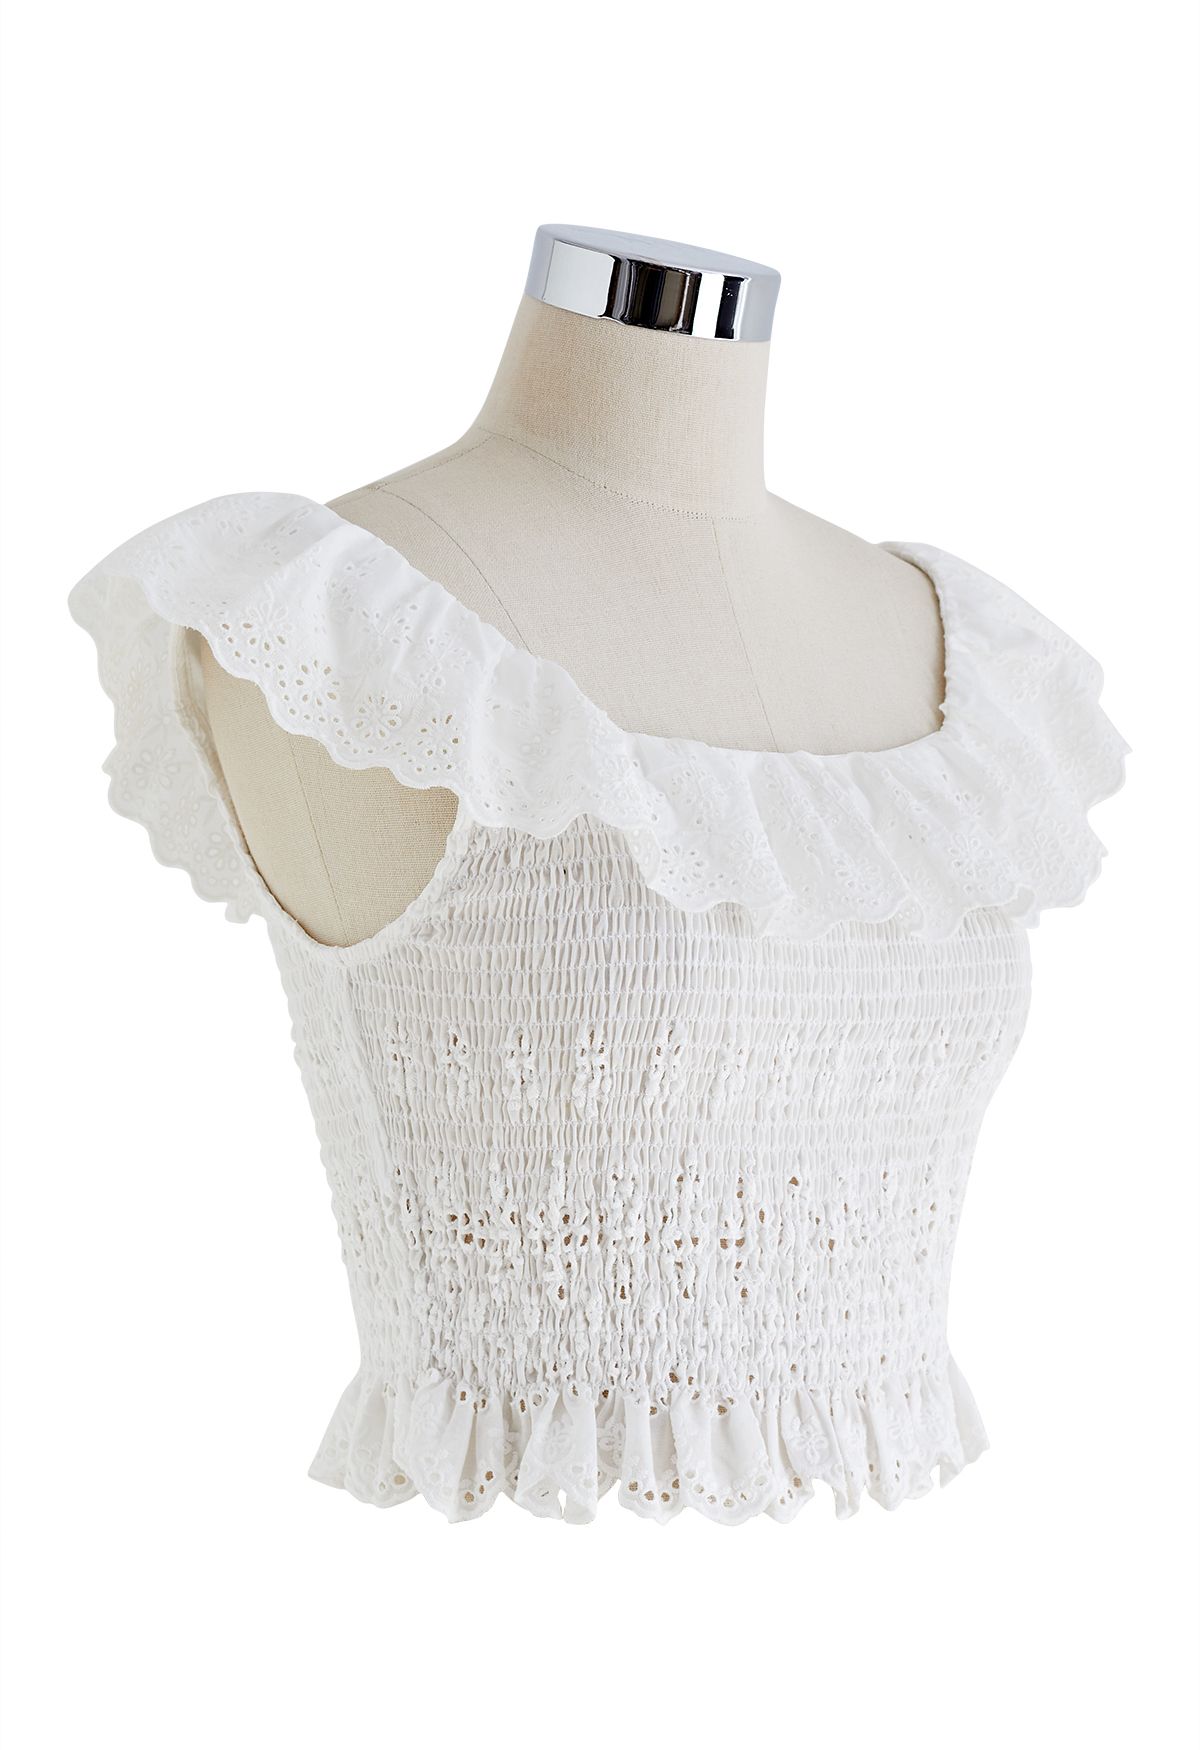 Floret Embroidered Eyelet Shirred Top in White